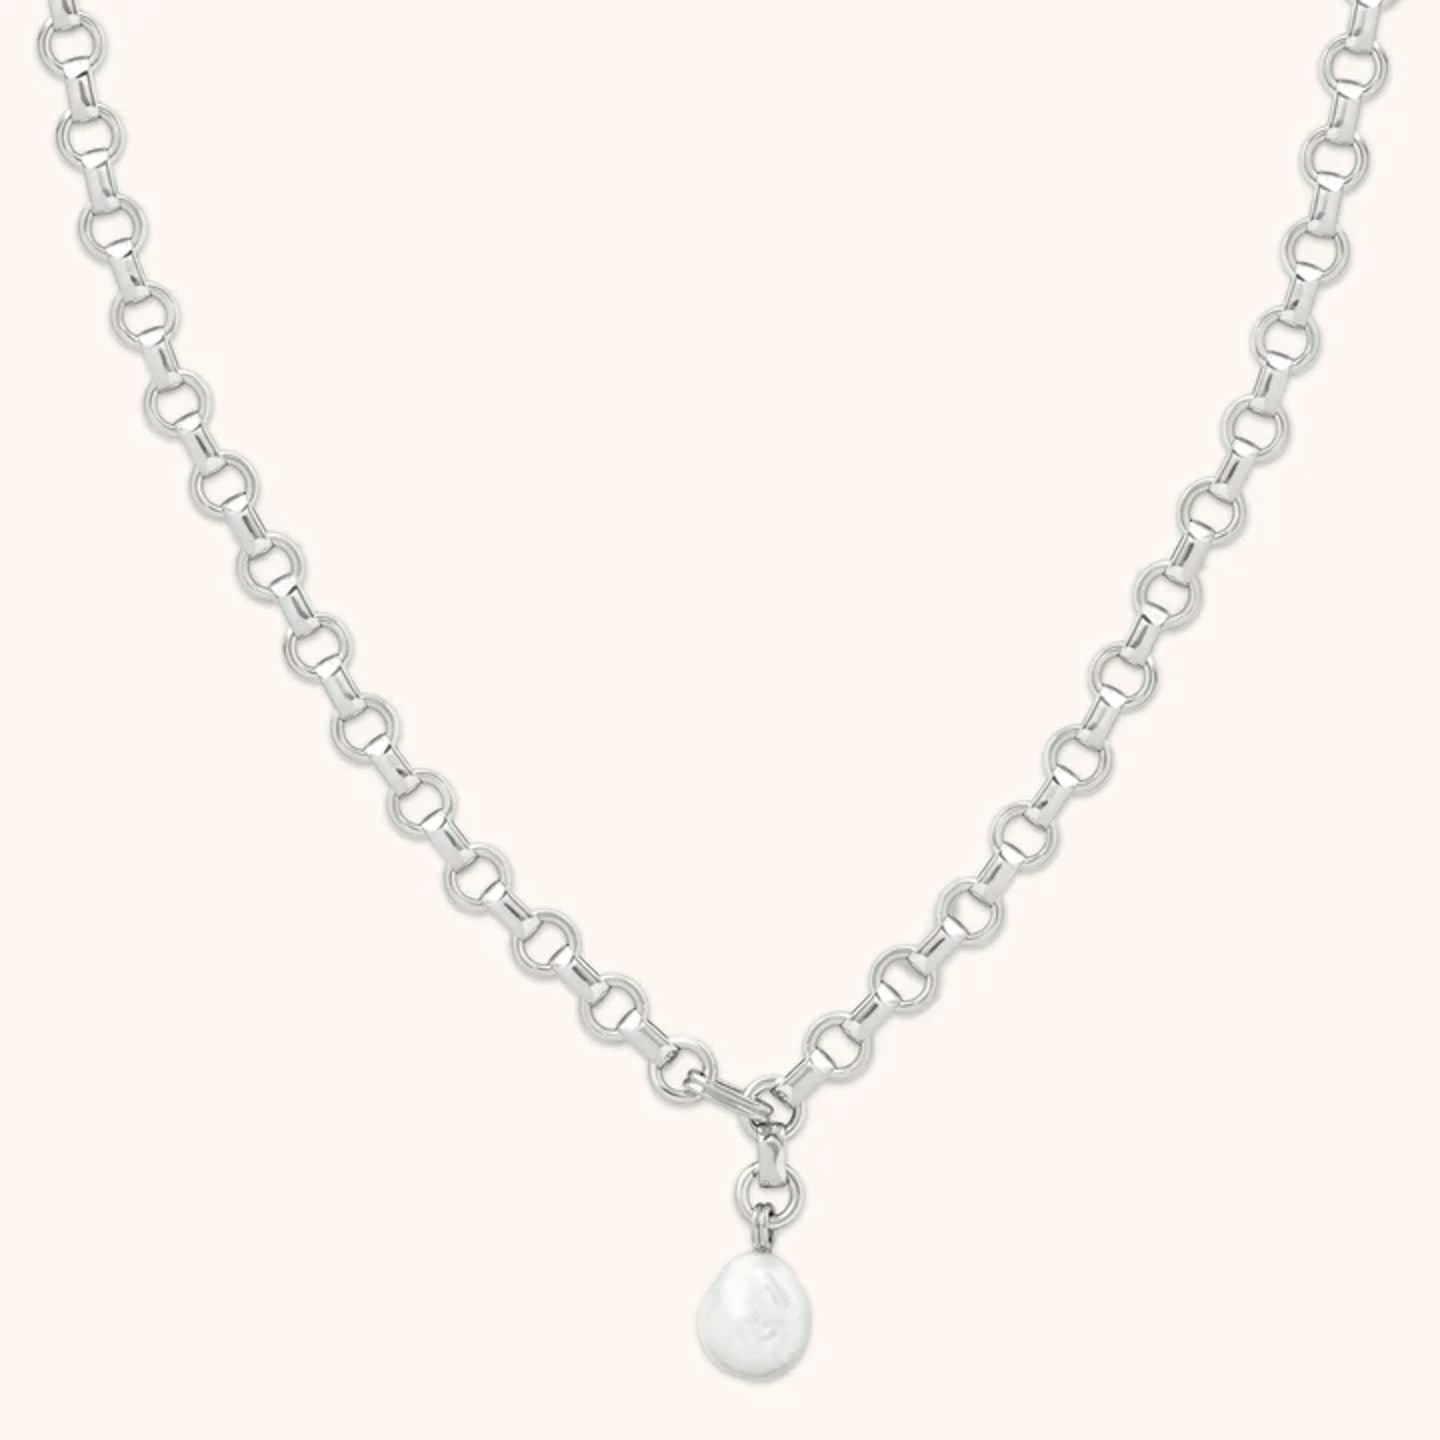 Astrid & Miyu Serenity Pearl Link Chain Necklace in Silver